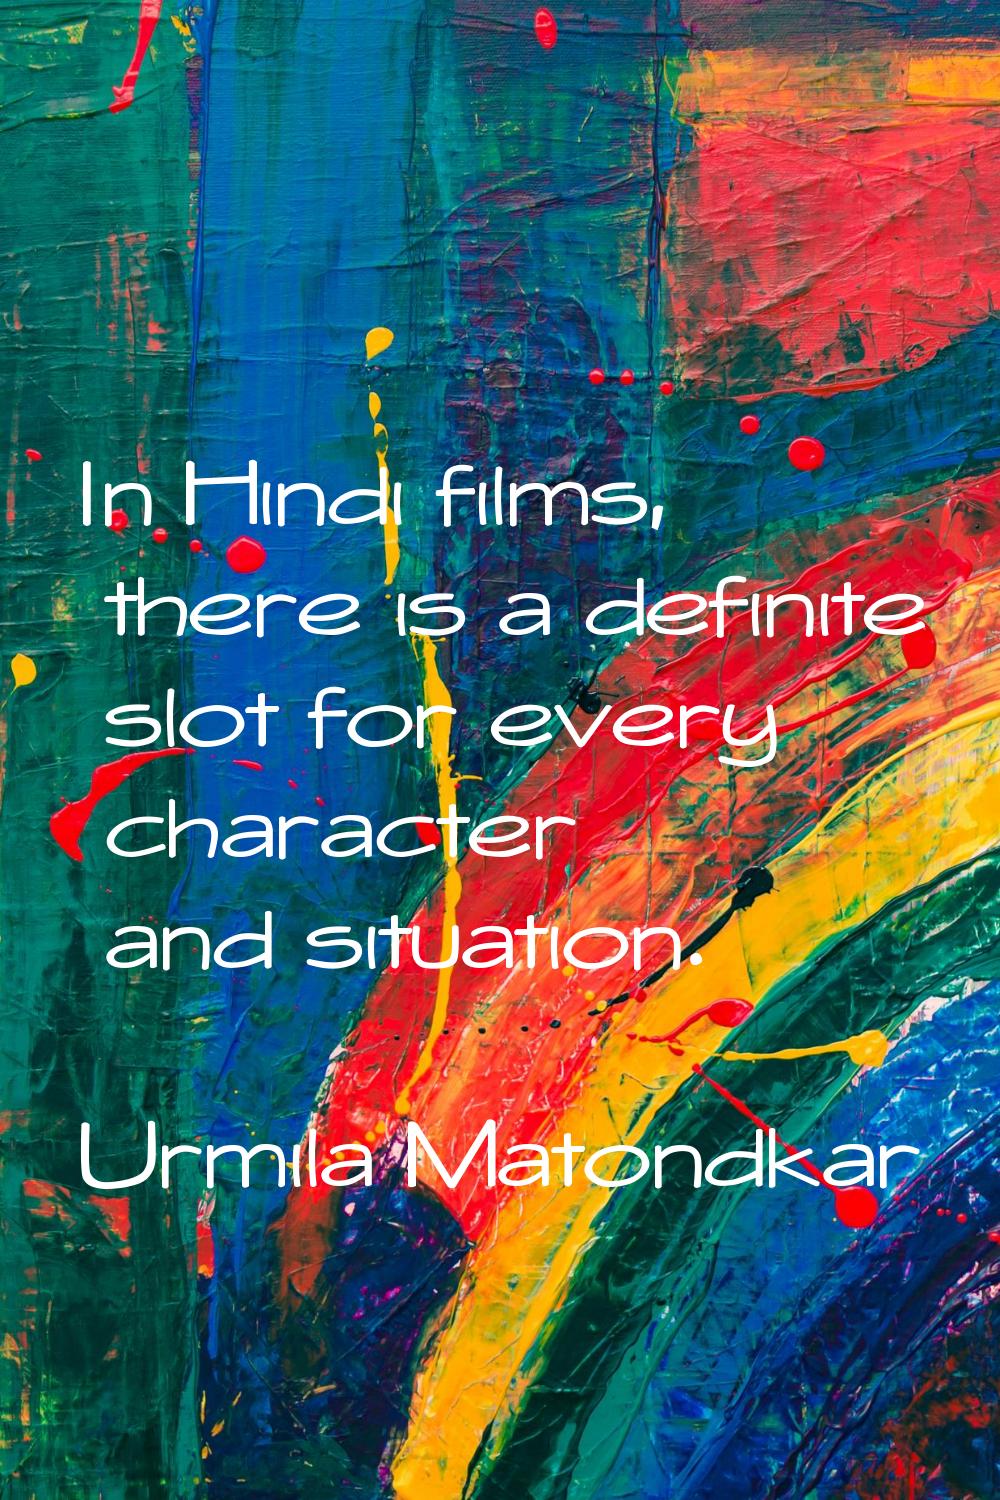 In Hindi films, there is a definite slot for every character and situation.